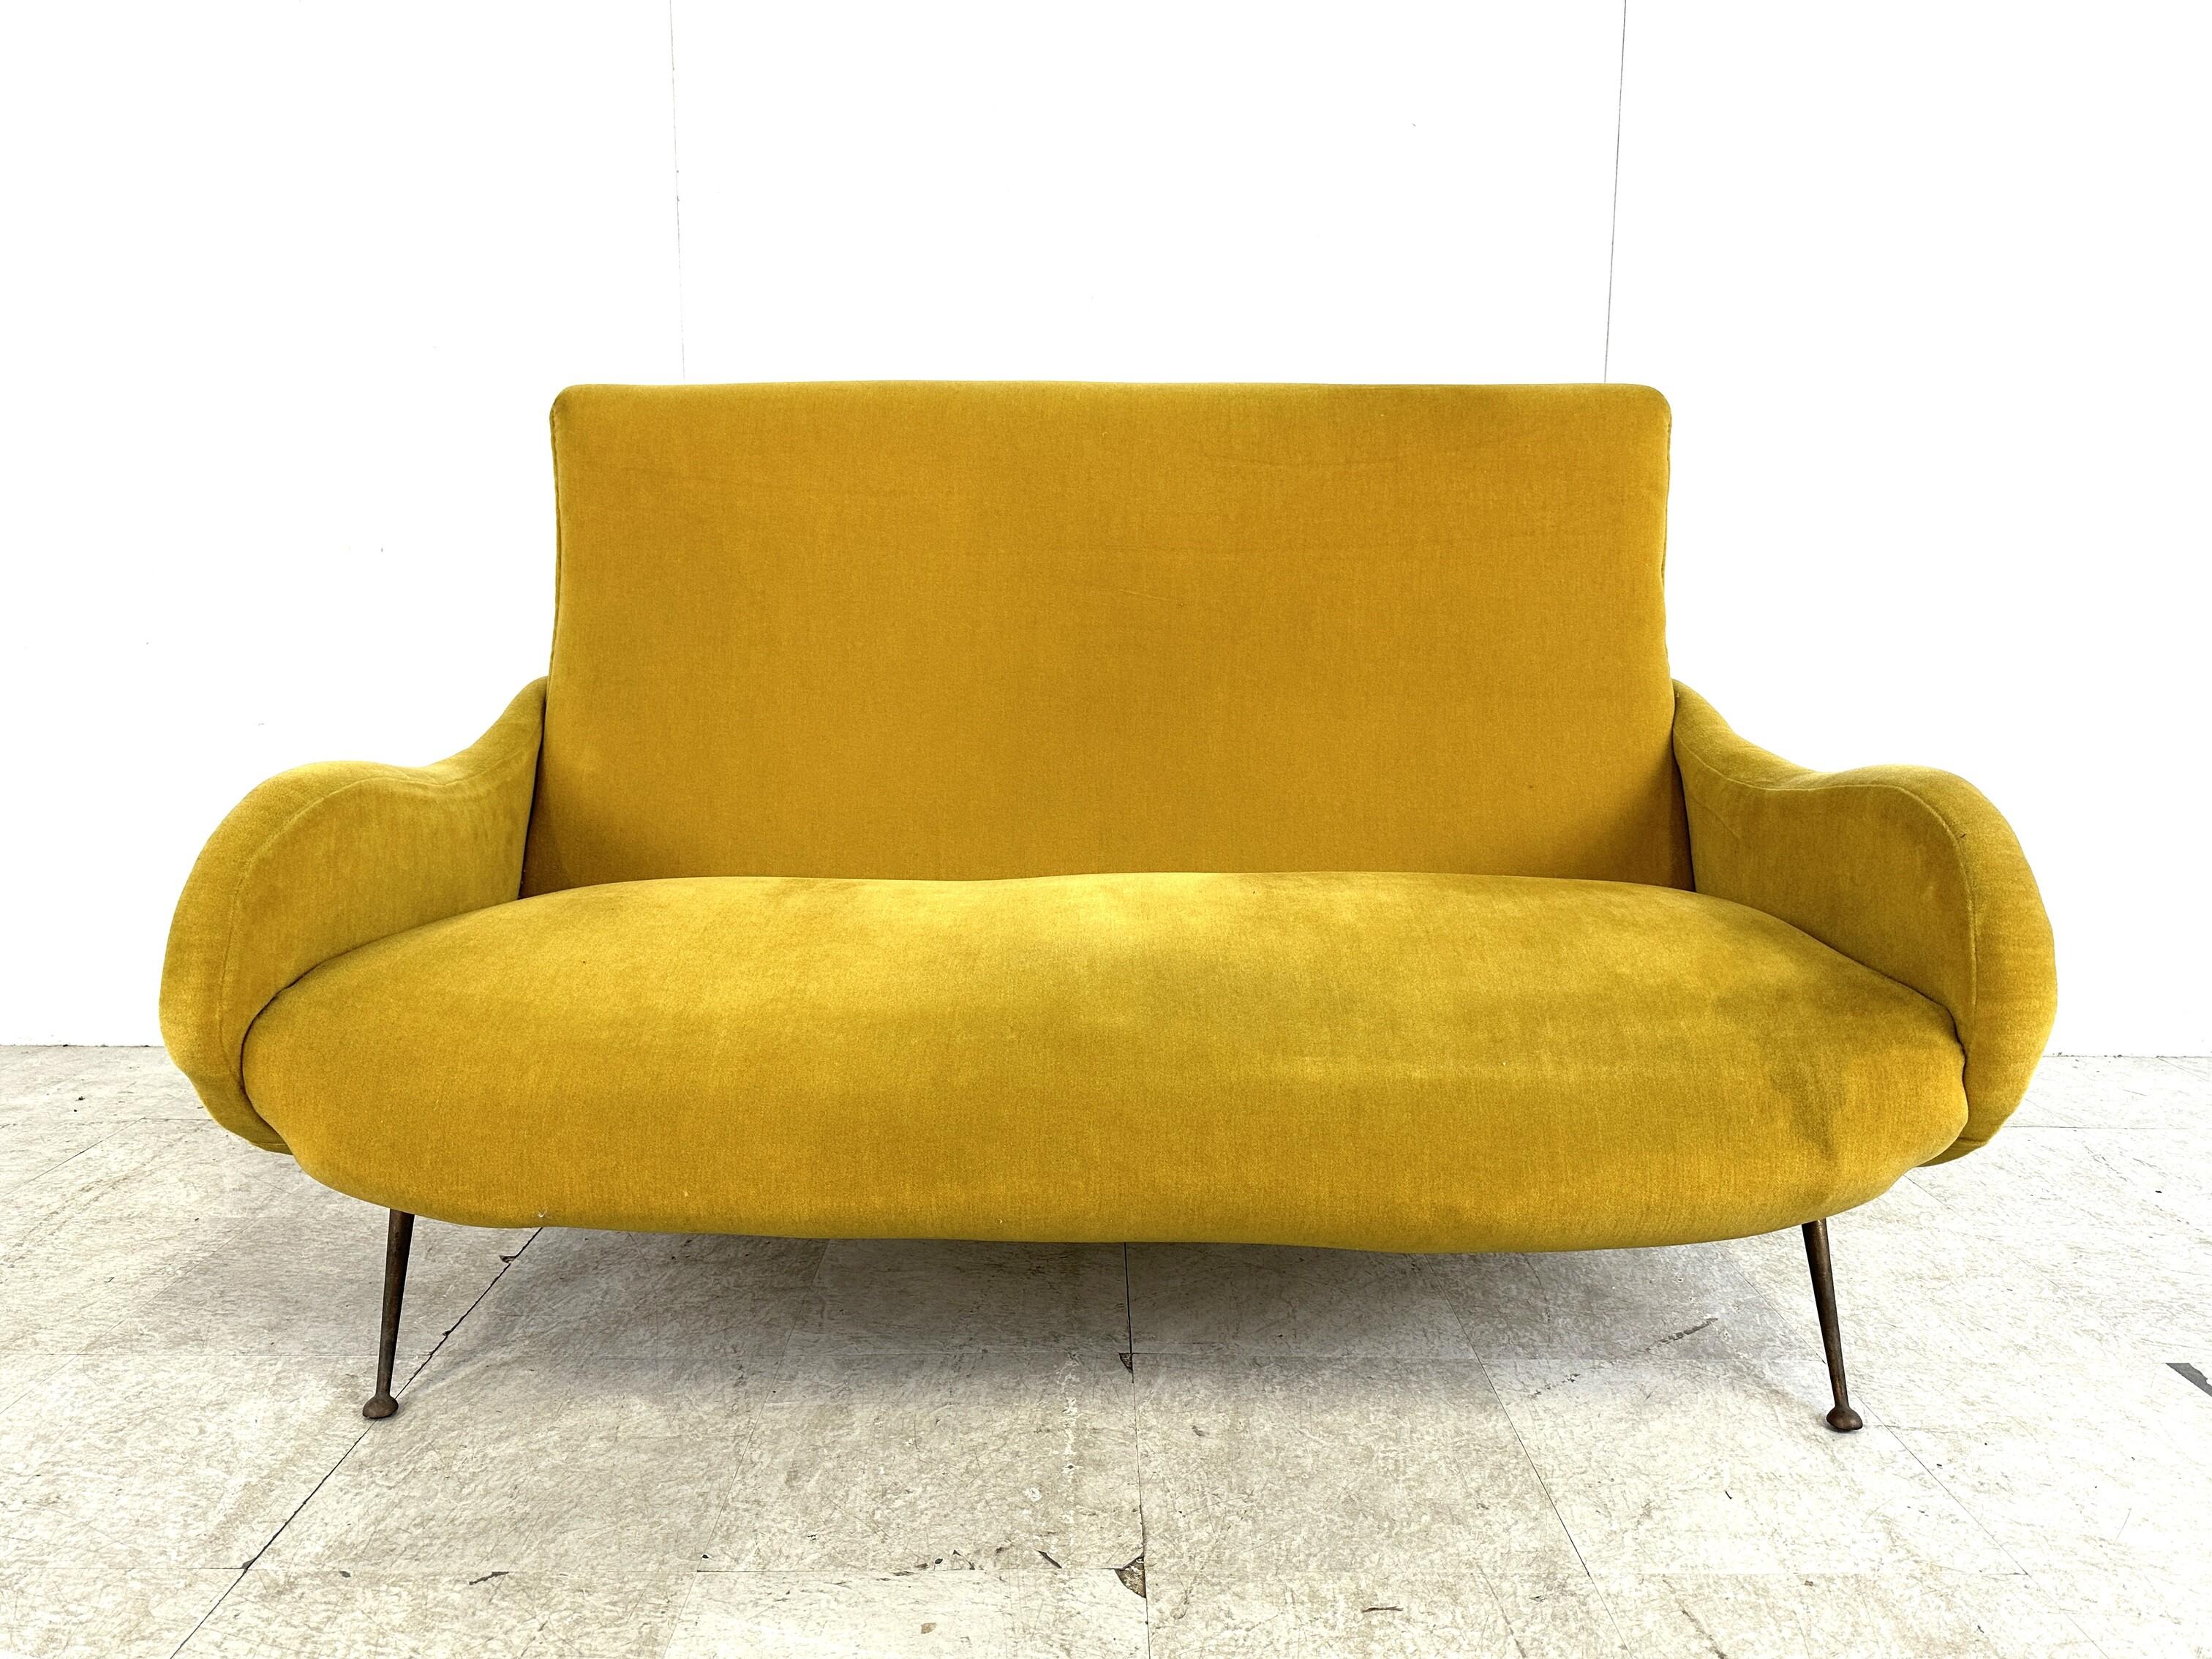 Mid century 'lady' sofa by Marco Zanuso in yellow velvet.

Original fabric.

very elegant curvy design and still very comfortable.

Very decorative and good looking mid century italian design piece.

Good overall condition, normal wear throughout